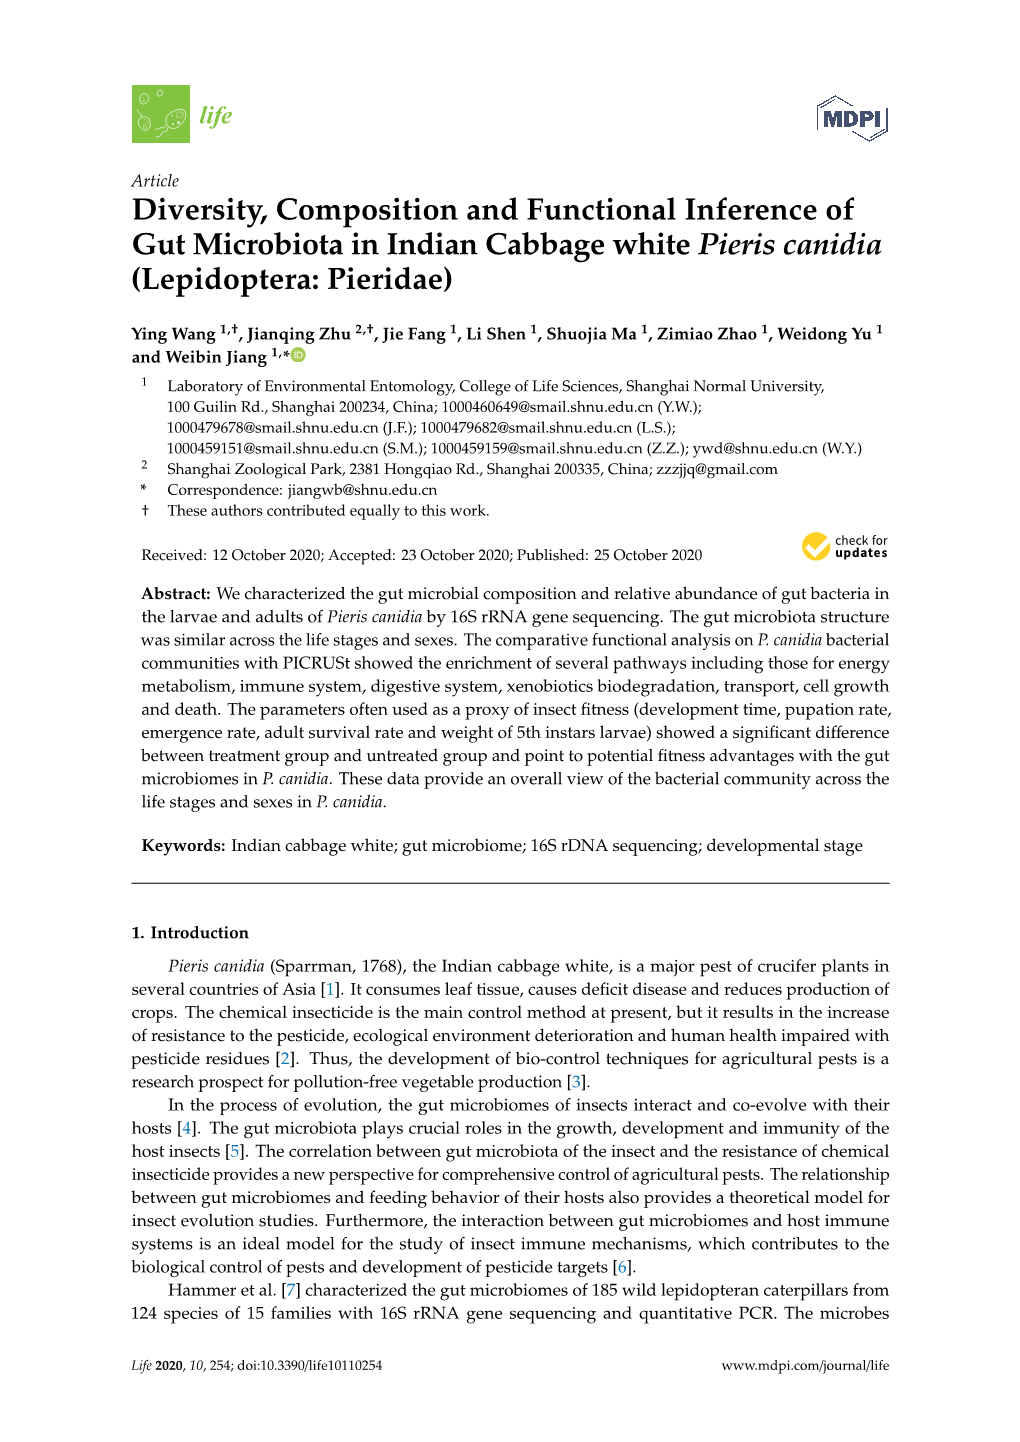 Diversity, Composition and Functional Inference of Gut Microbiota in Indian Cabbage White Pieris Canidia (Lepidoptera: Pieridae)